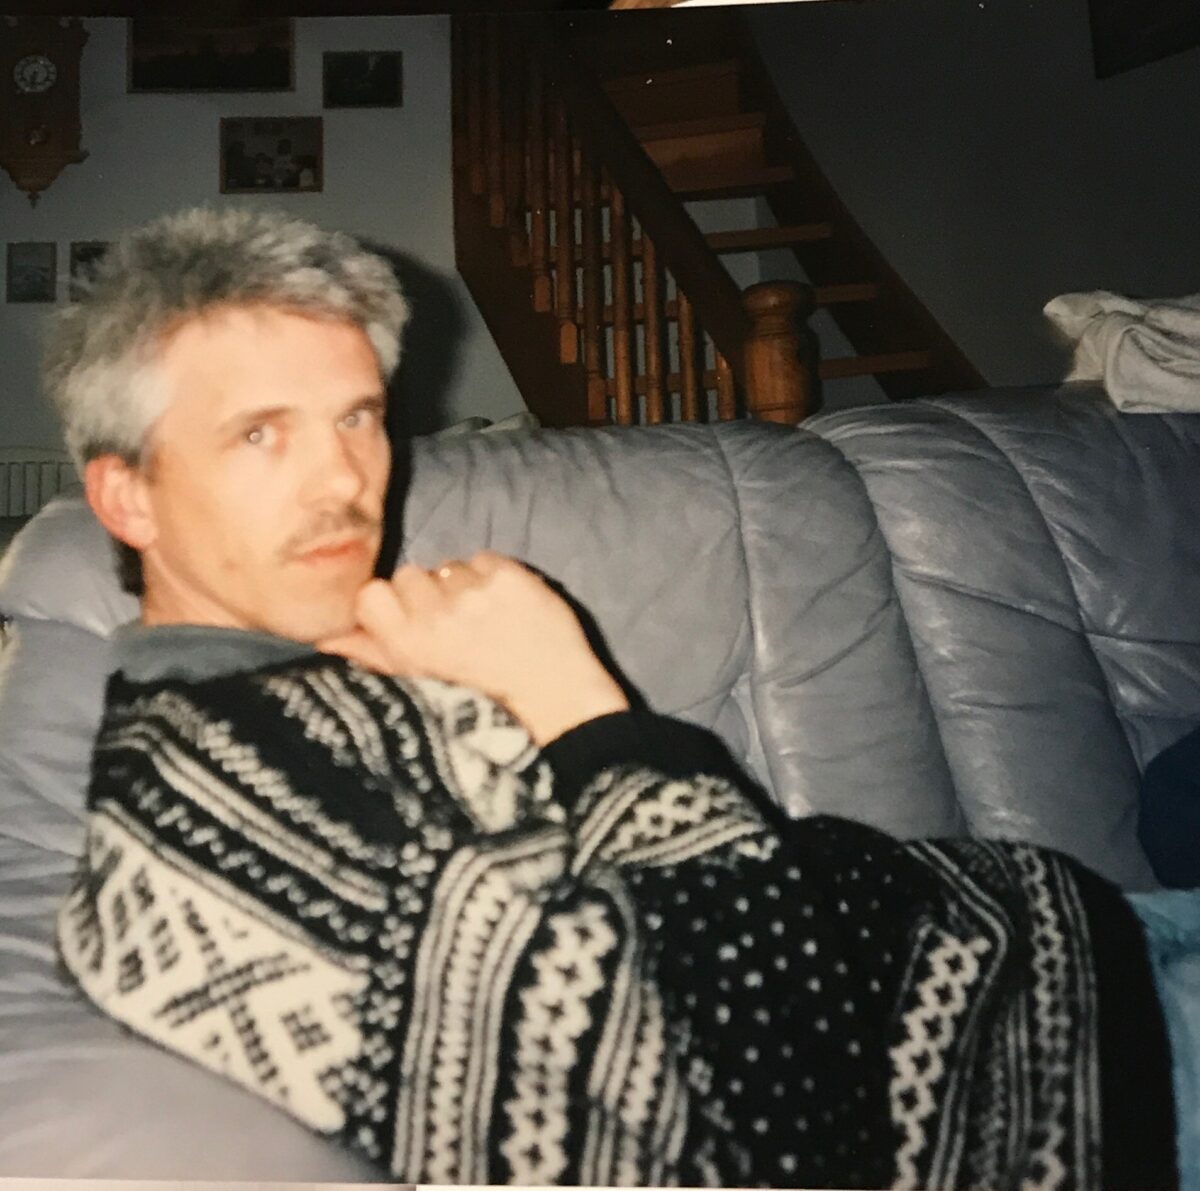 Norwegian hand knit sweater, and non minimalist dad.